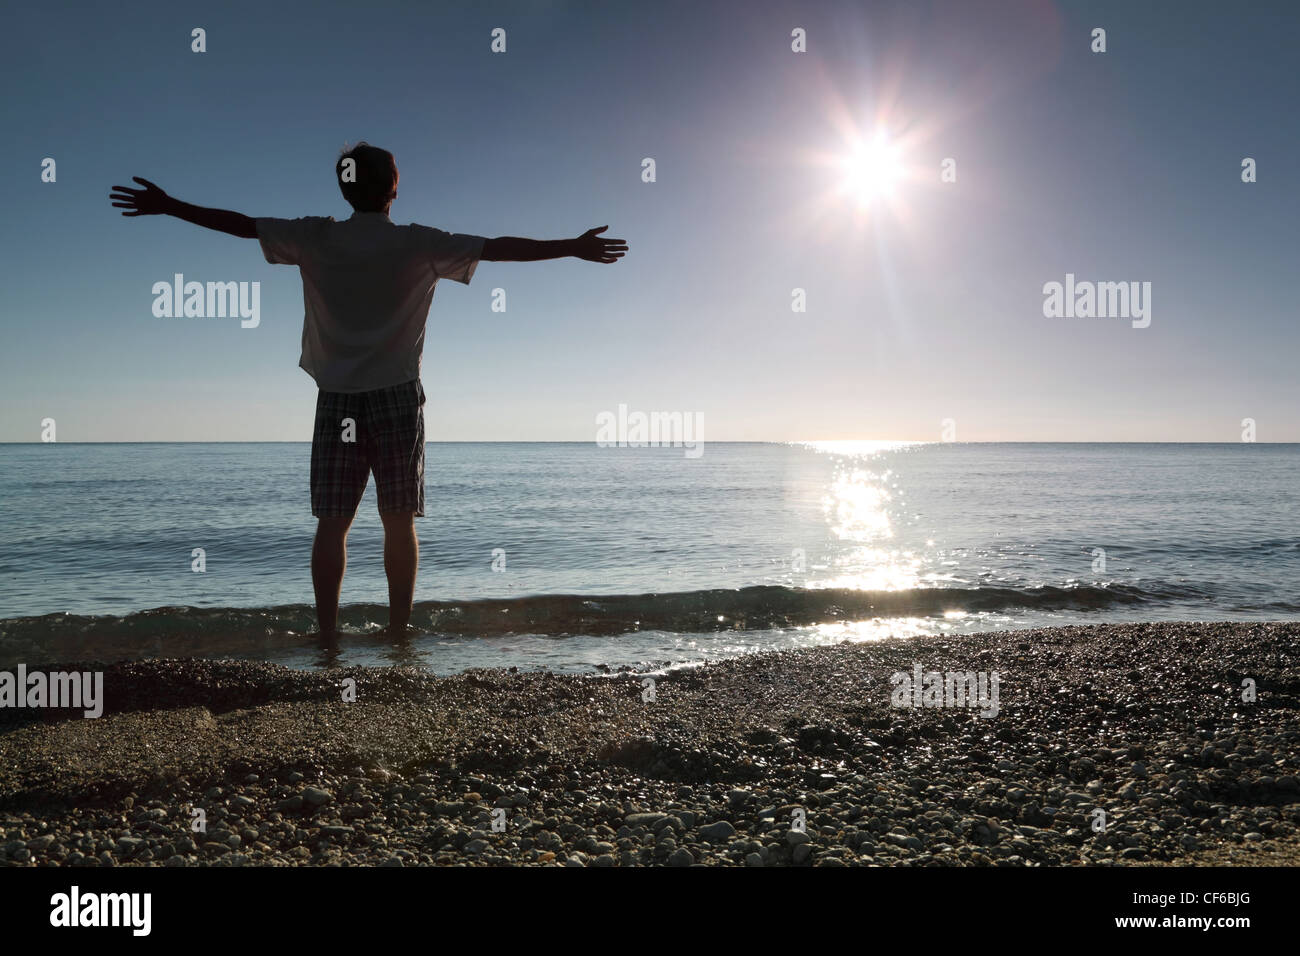 Man stands ashore in water and conducts hands in sides Stock Photo